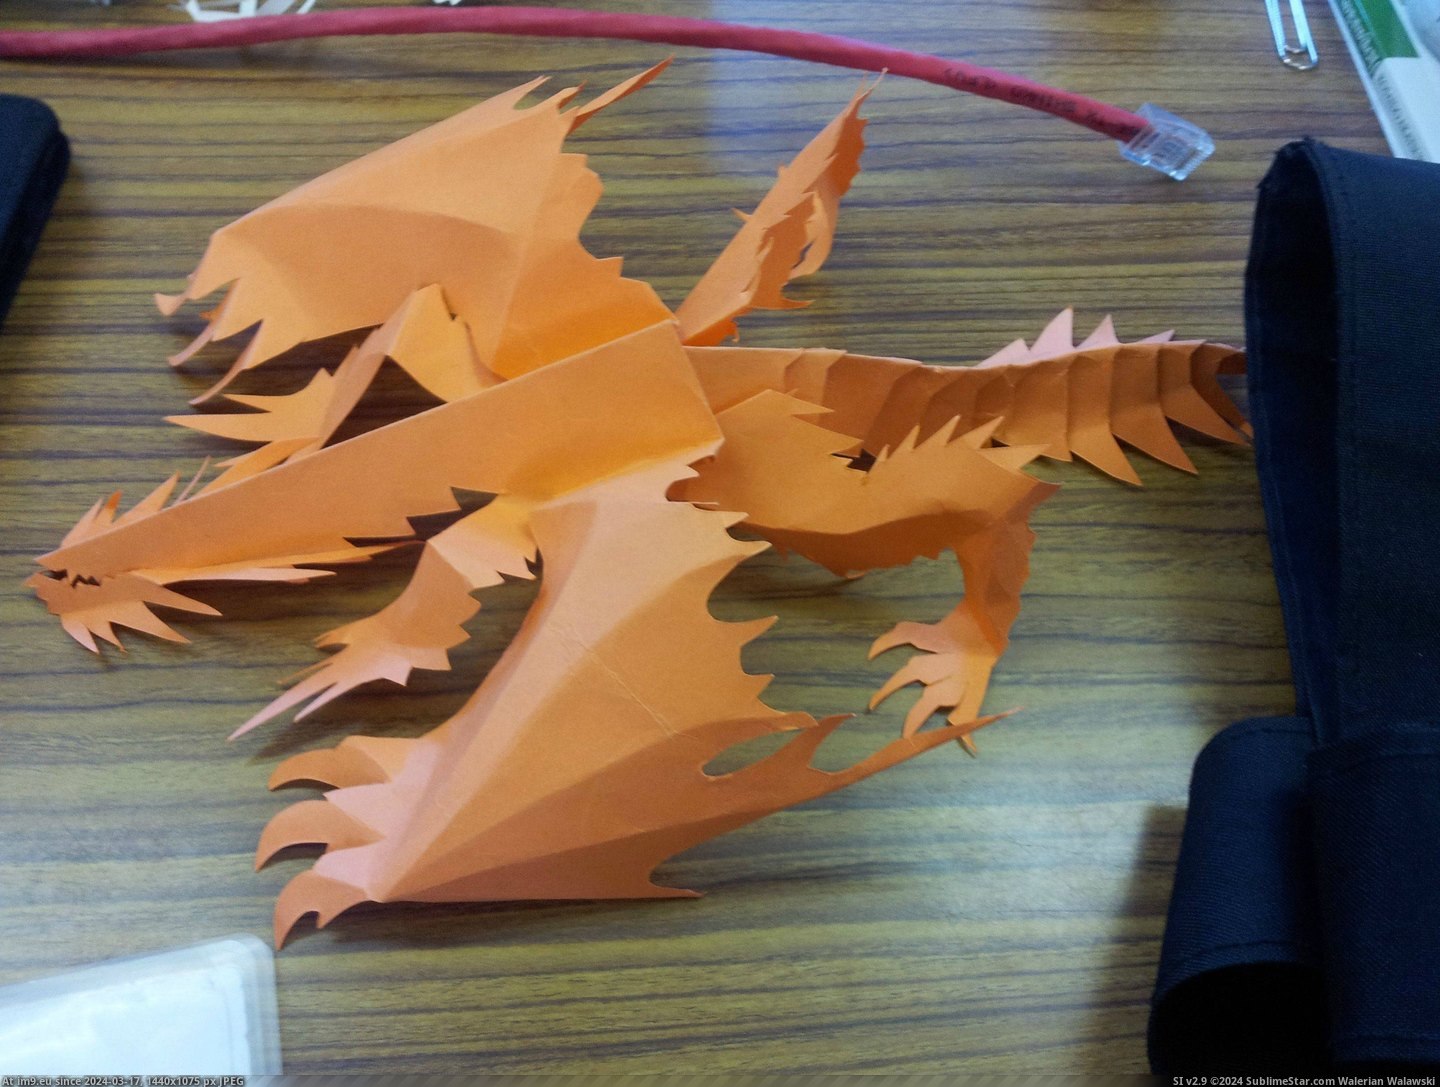 #One #Paper #Students #Creatures #Freehand #Bored #Completely [Pics] One of my students makes these creatures out of paper completely freehand whenever he is bored 5 Pic. (Obraz z album My r/PICS favs))